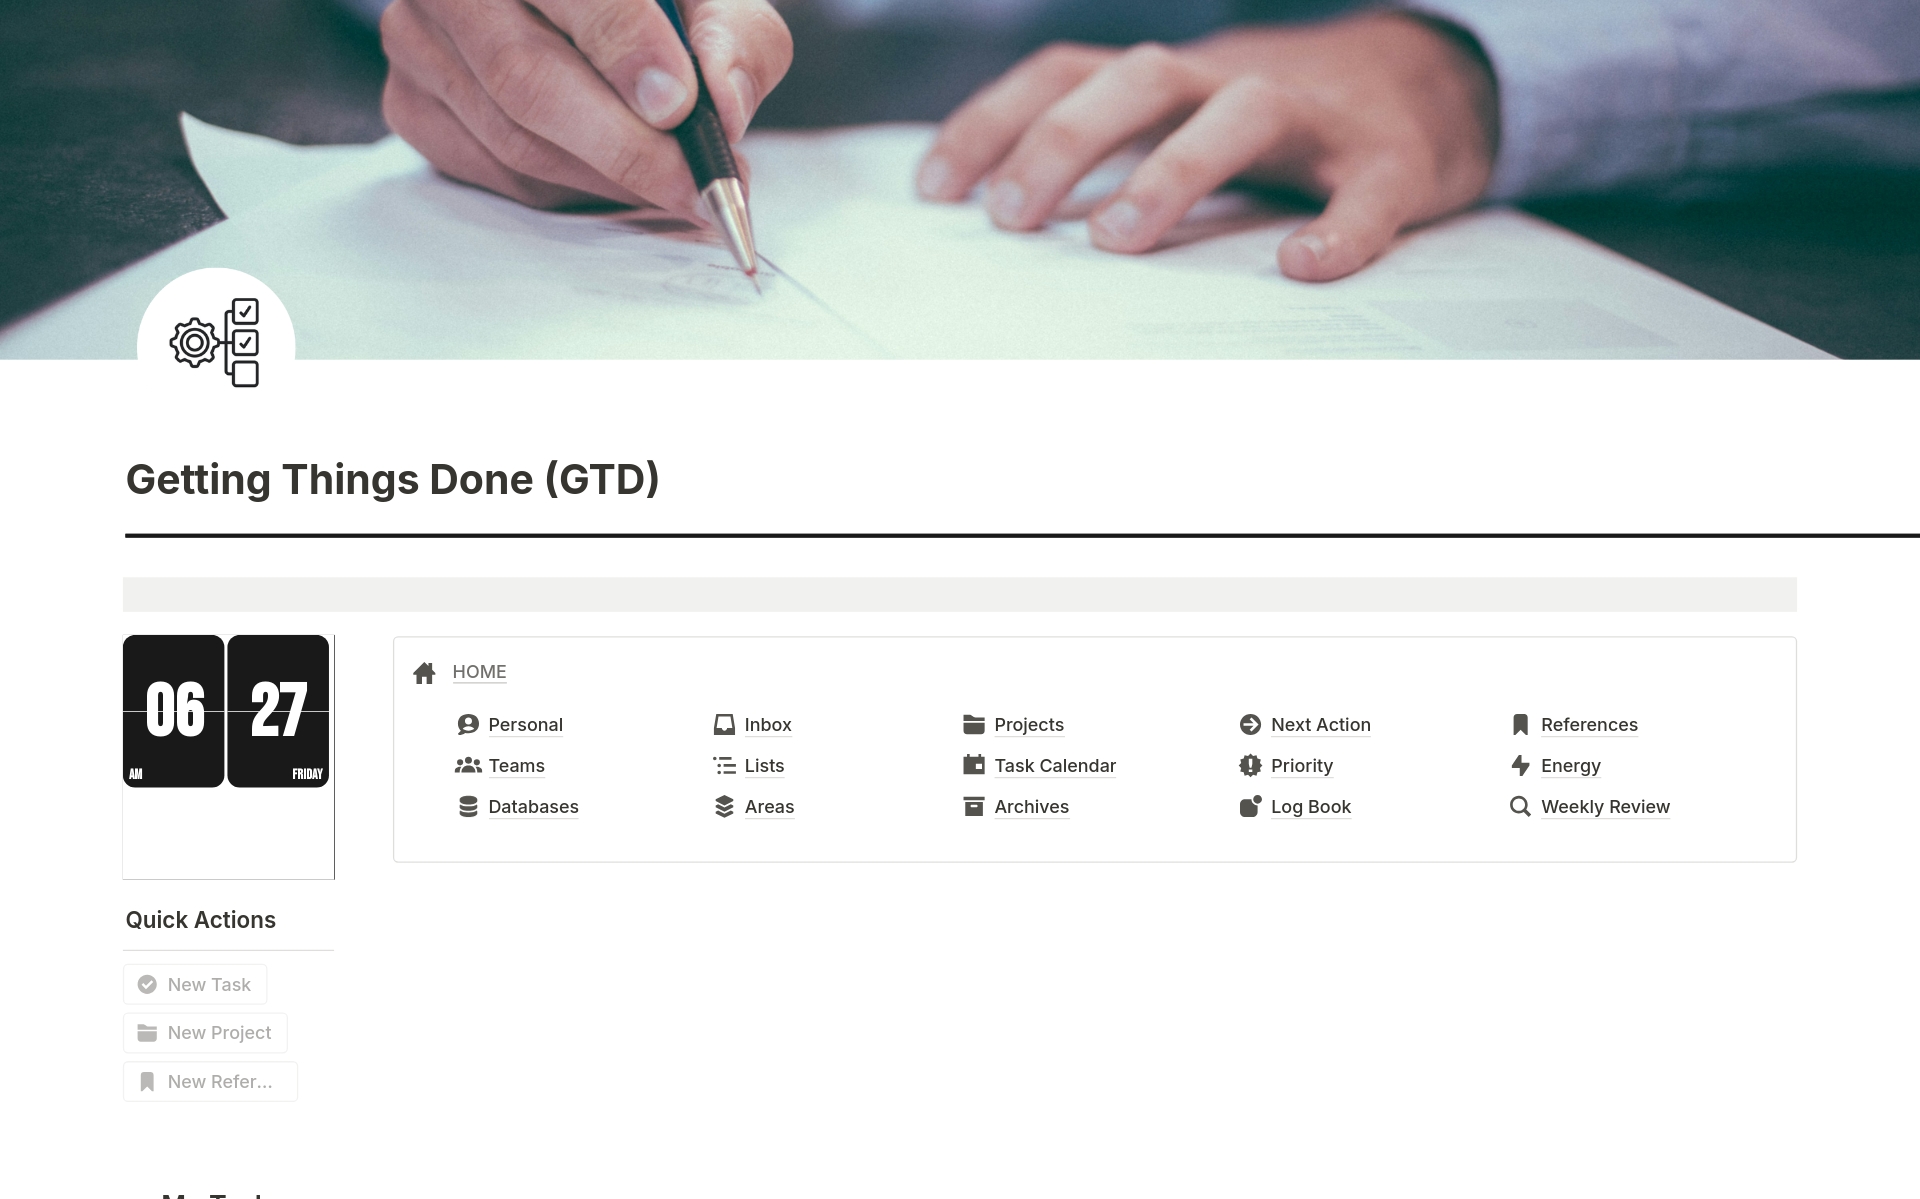 Your Path to Peak Productivity Starts Here! Harness the Power of This Comprehensive Notion Template System to Implement the Get Things Done (GTD) Method and Achieve Your Goals With Laser Focus.